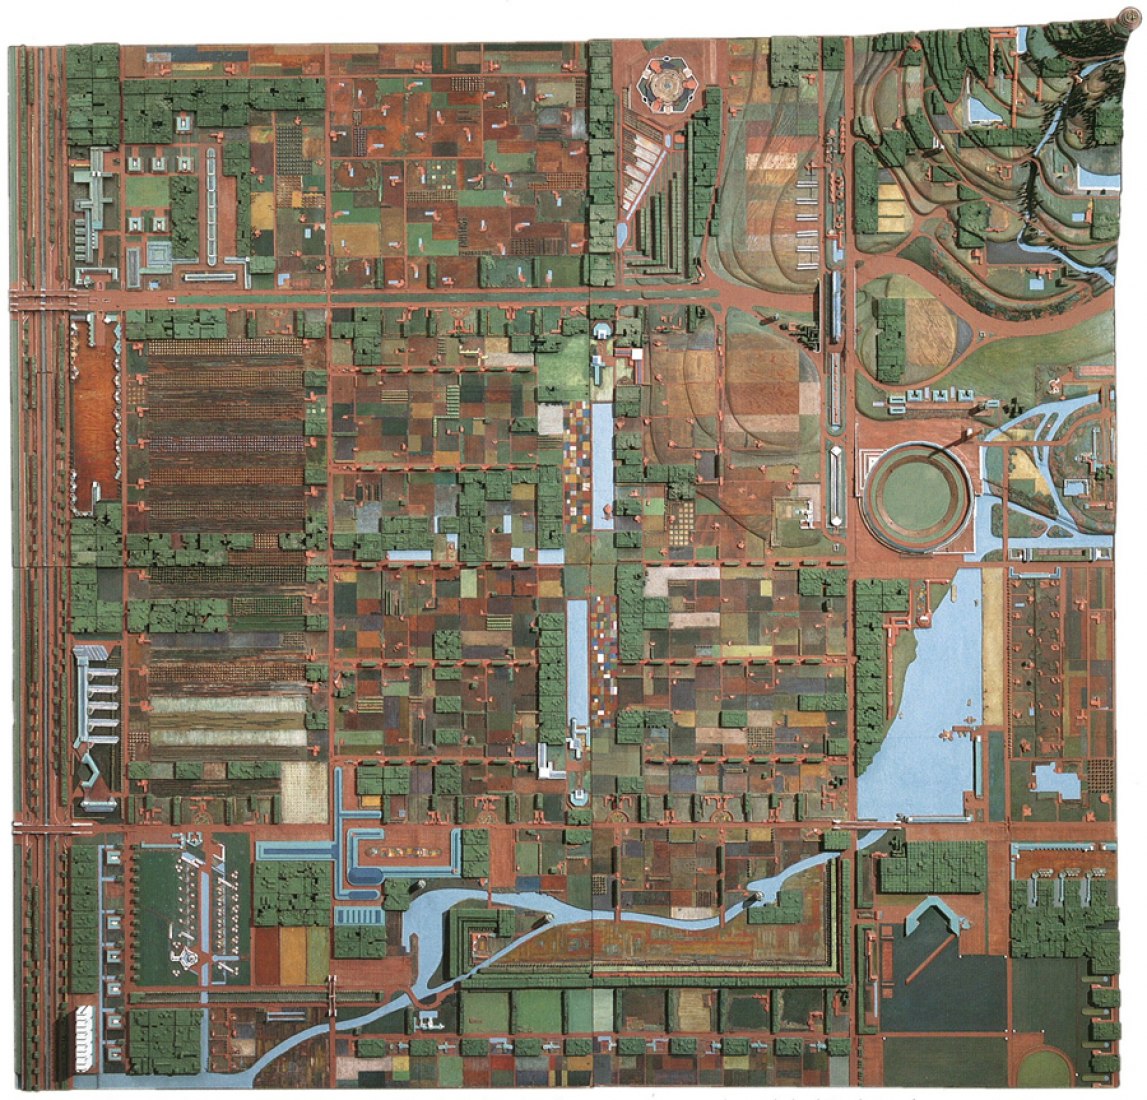 Frank Lloyd Wright (American, 1867–1959). Broadacre City. Project, 1934–35. Model: painted wood, 152 x 152” (386.1 x 386.1 cm). The Frank Lloyd Wright Foundation Archives (The Museum of Modern Art | Avery Architectural & Fine Arts Library, Columbia University, New York).